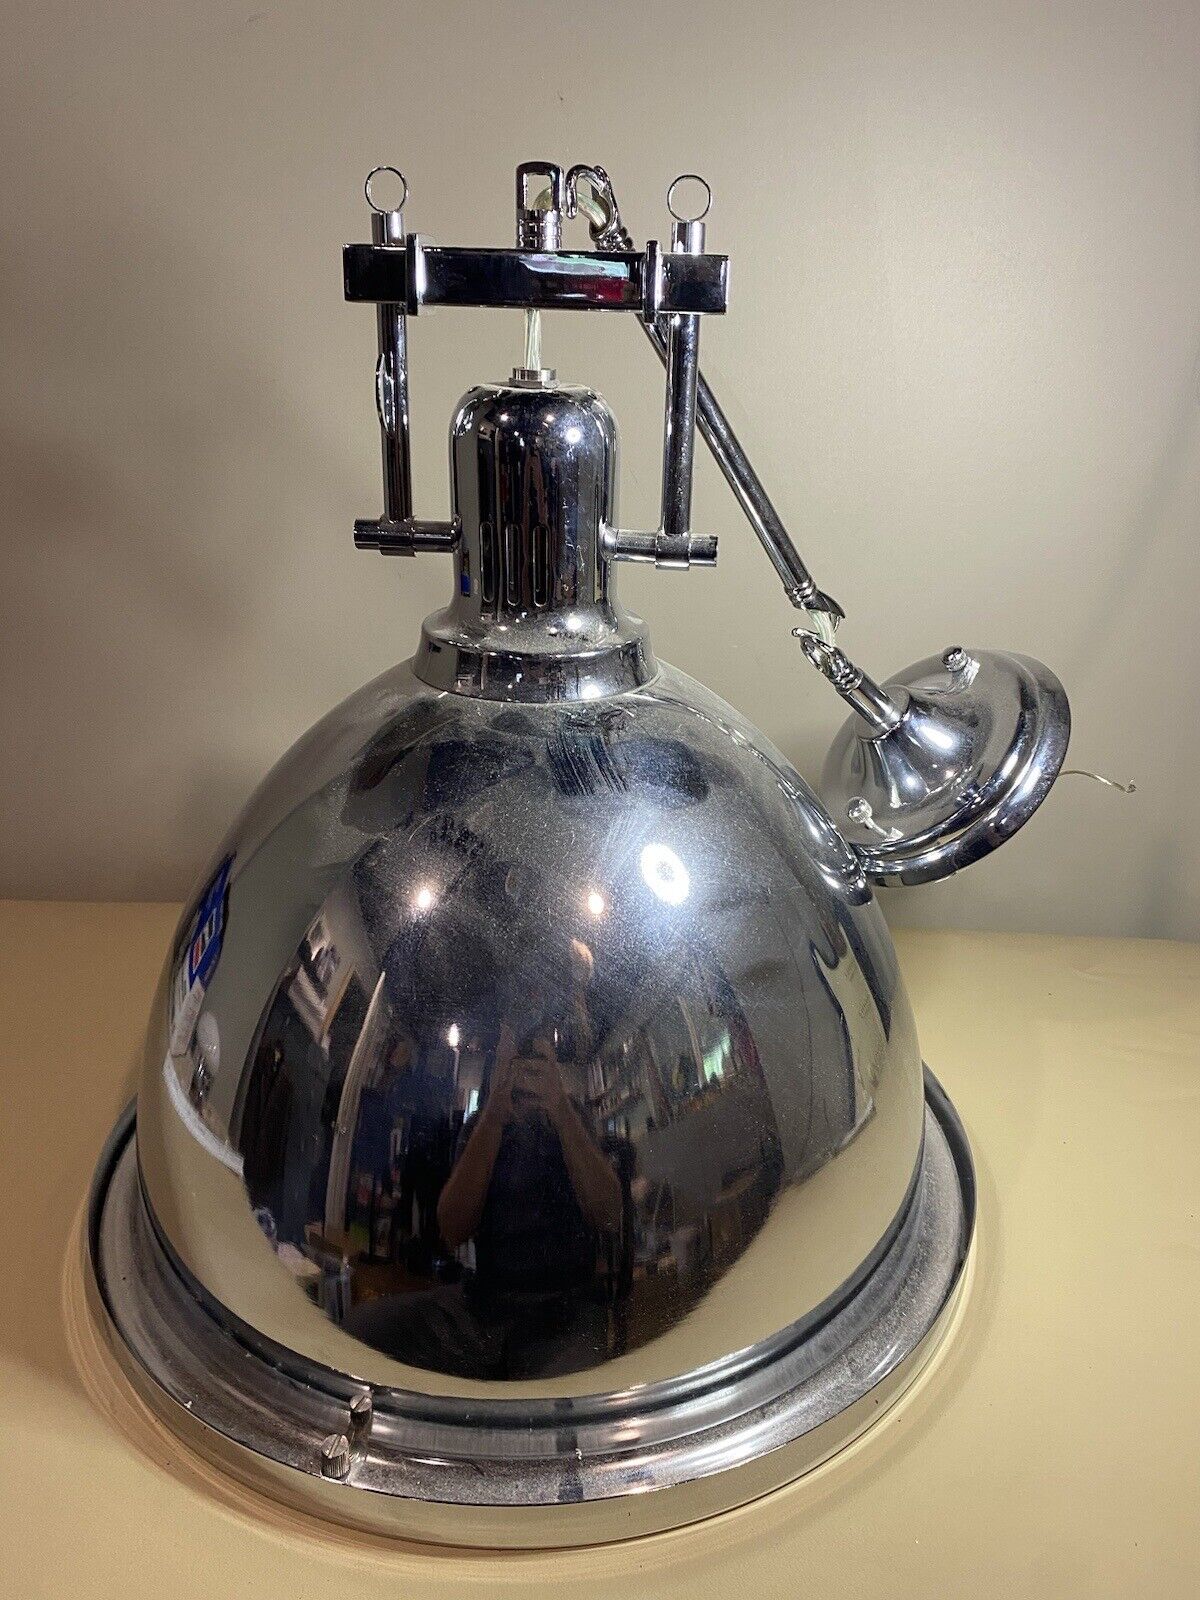 Vintage Eclectic Large 14 Inch Stainless Steel Hanging Dome Light EUC Industrial